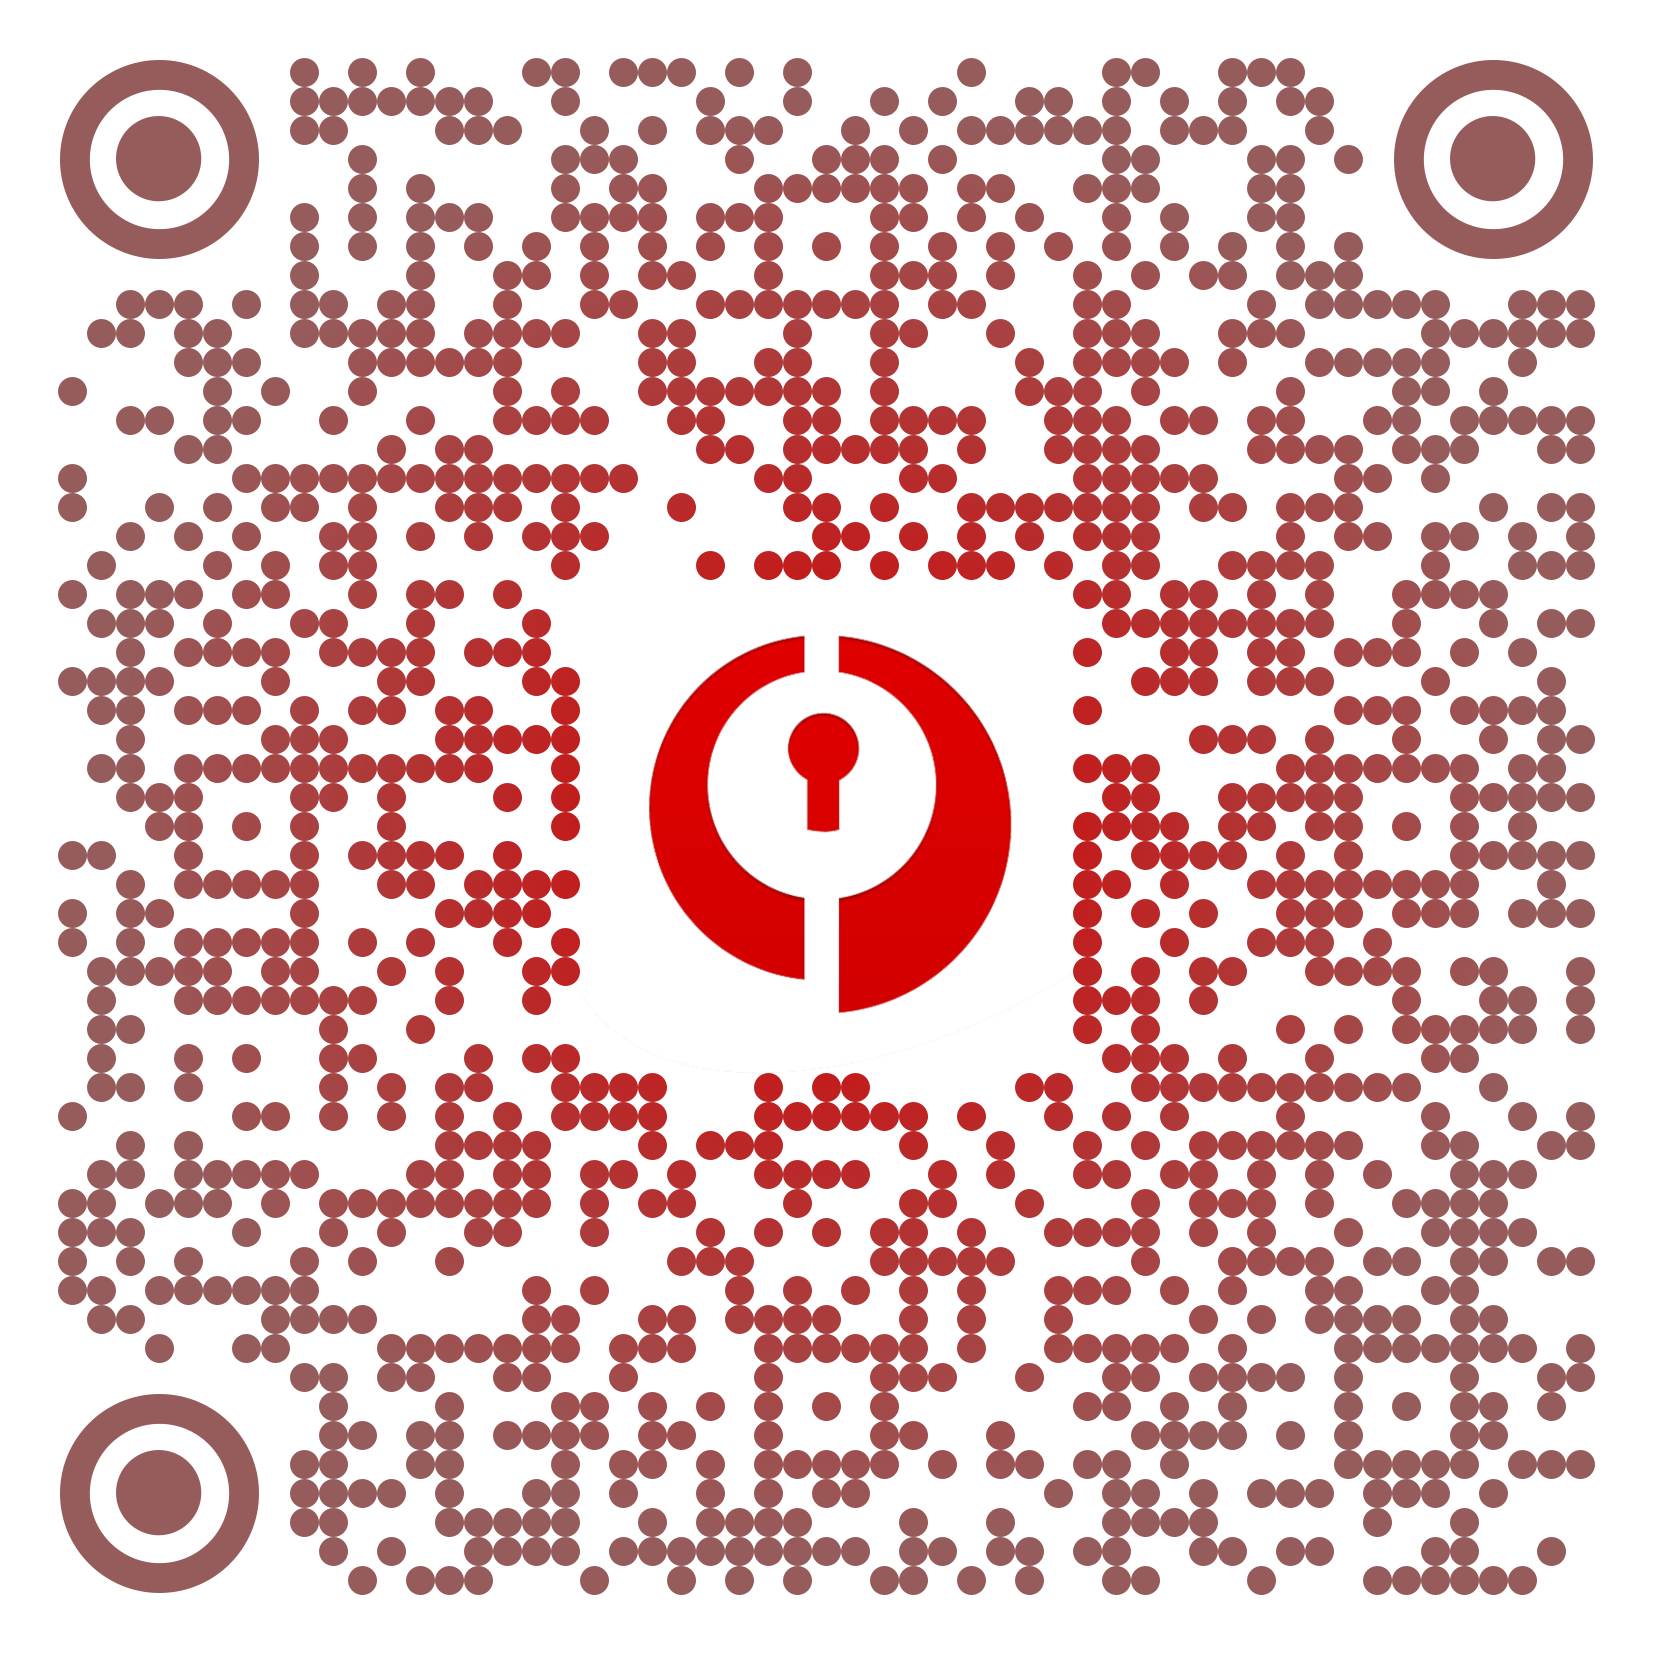 Scan the QR Code to install Trend Micro Password Manager